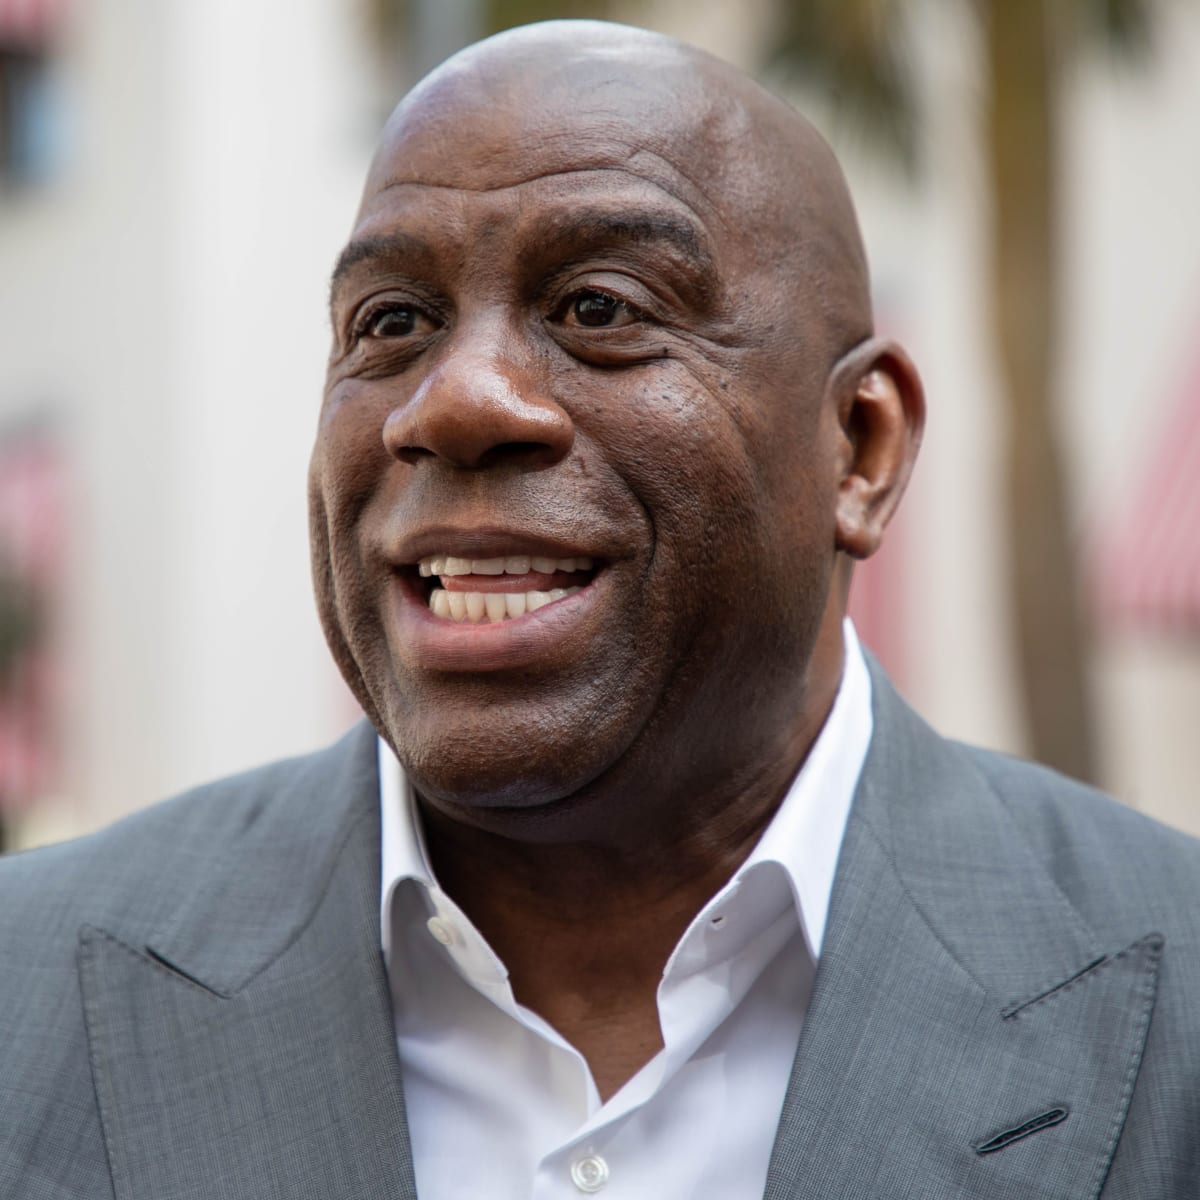 Magic Johnson says he will stop complaining about the Lakers - Los